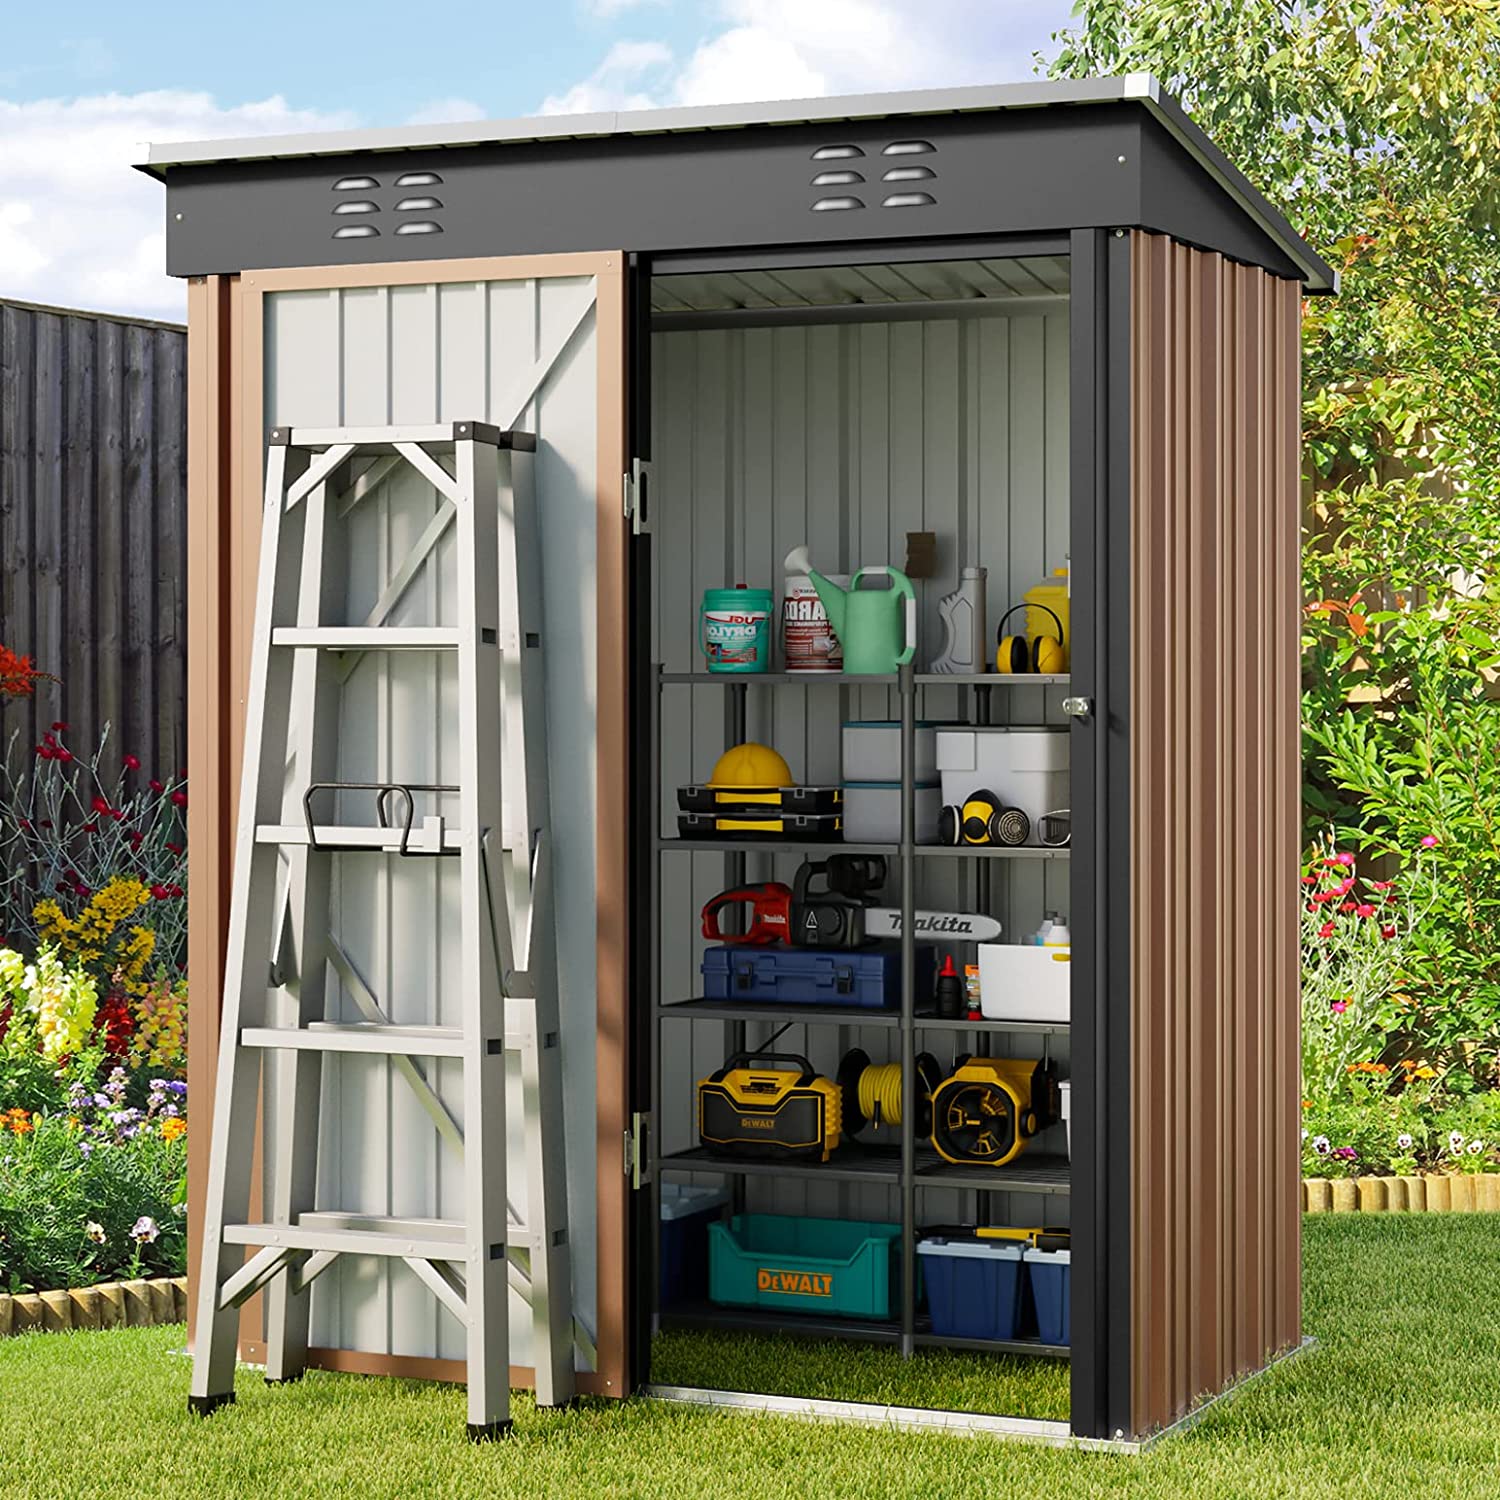 Gizoon Outdoor Storage Shed